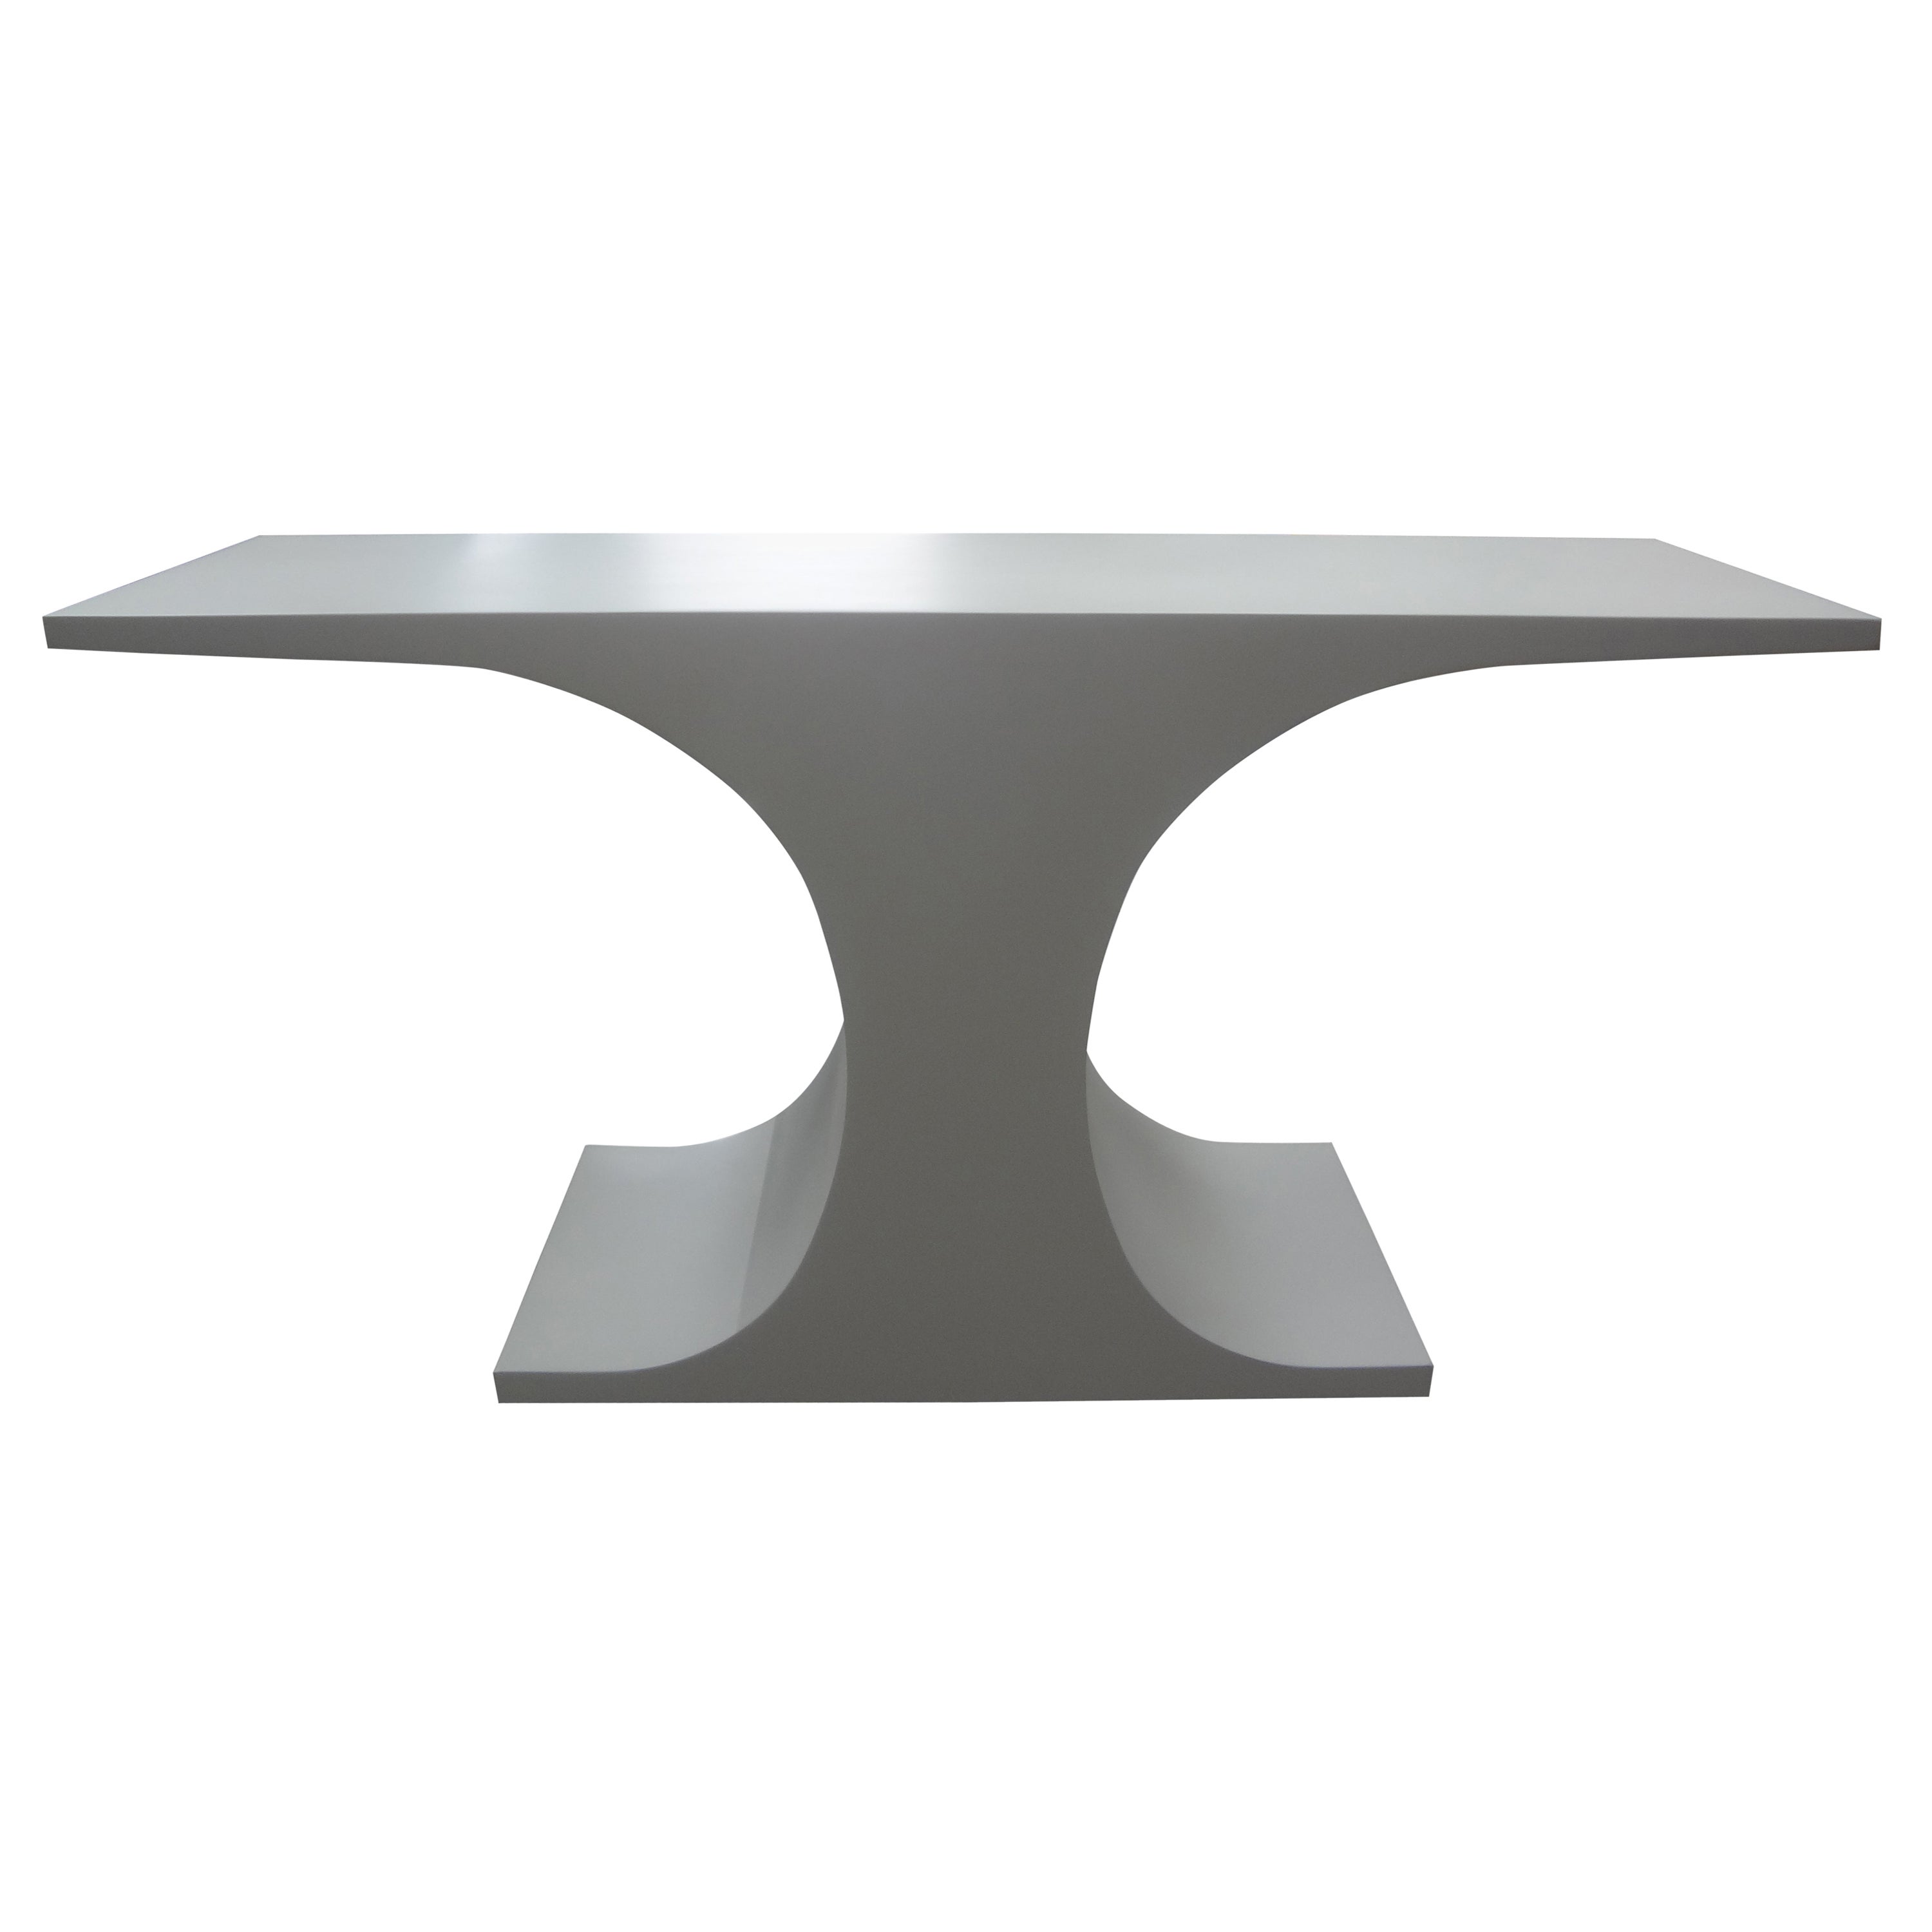 Postmodern Sculptural Console Table